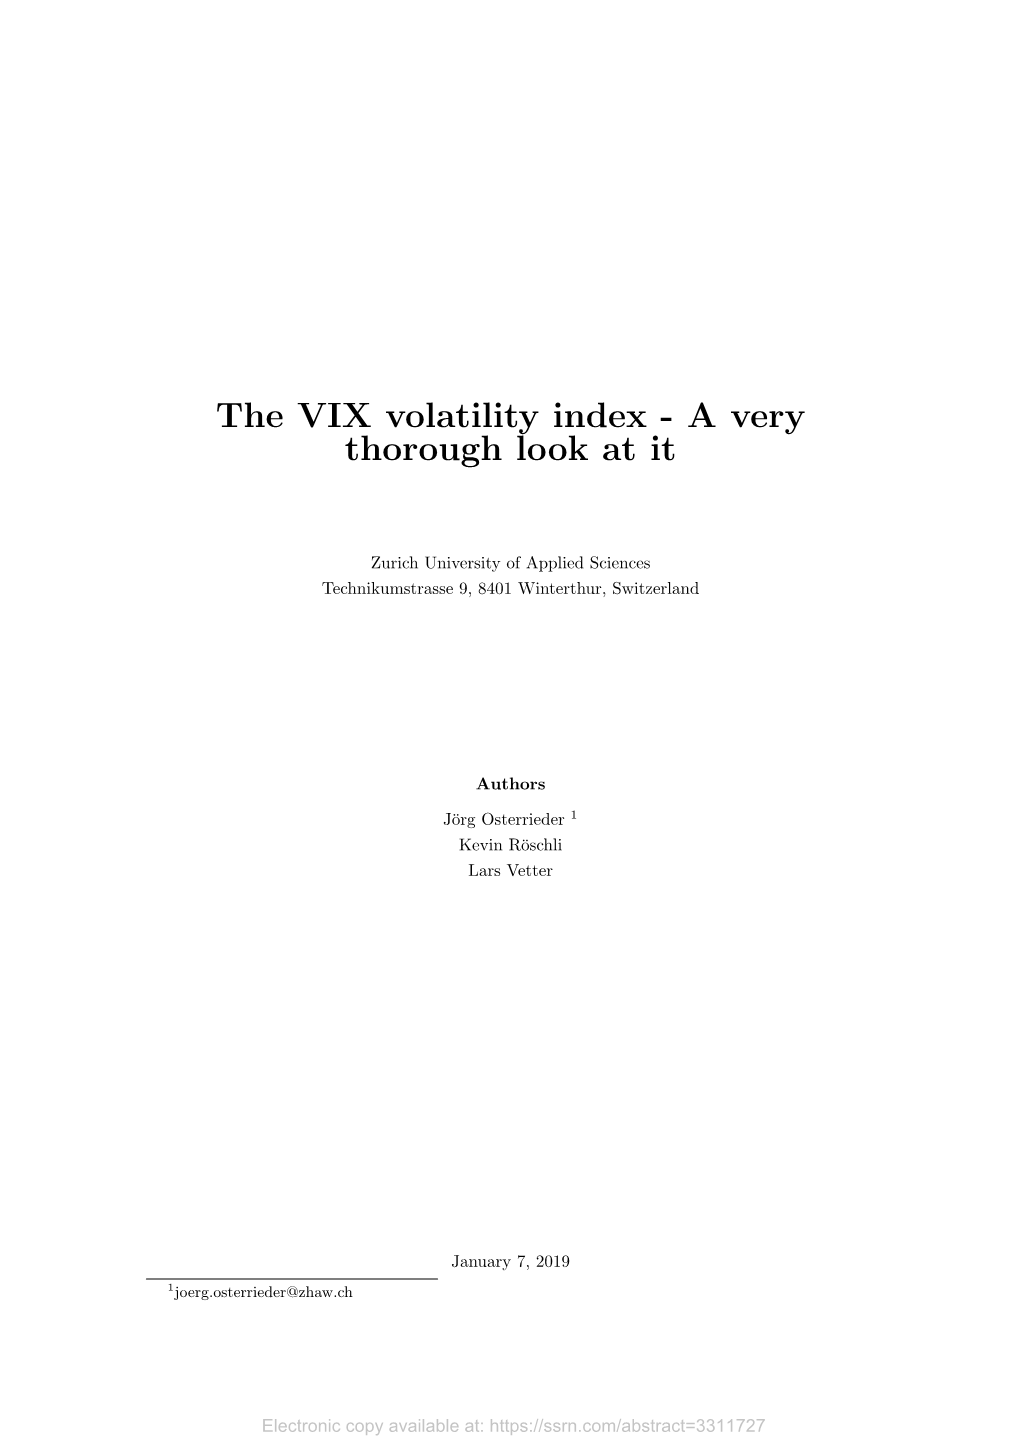 The VIX Volatility Index - a Very Thorough Look at It